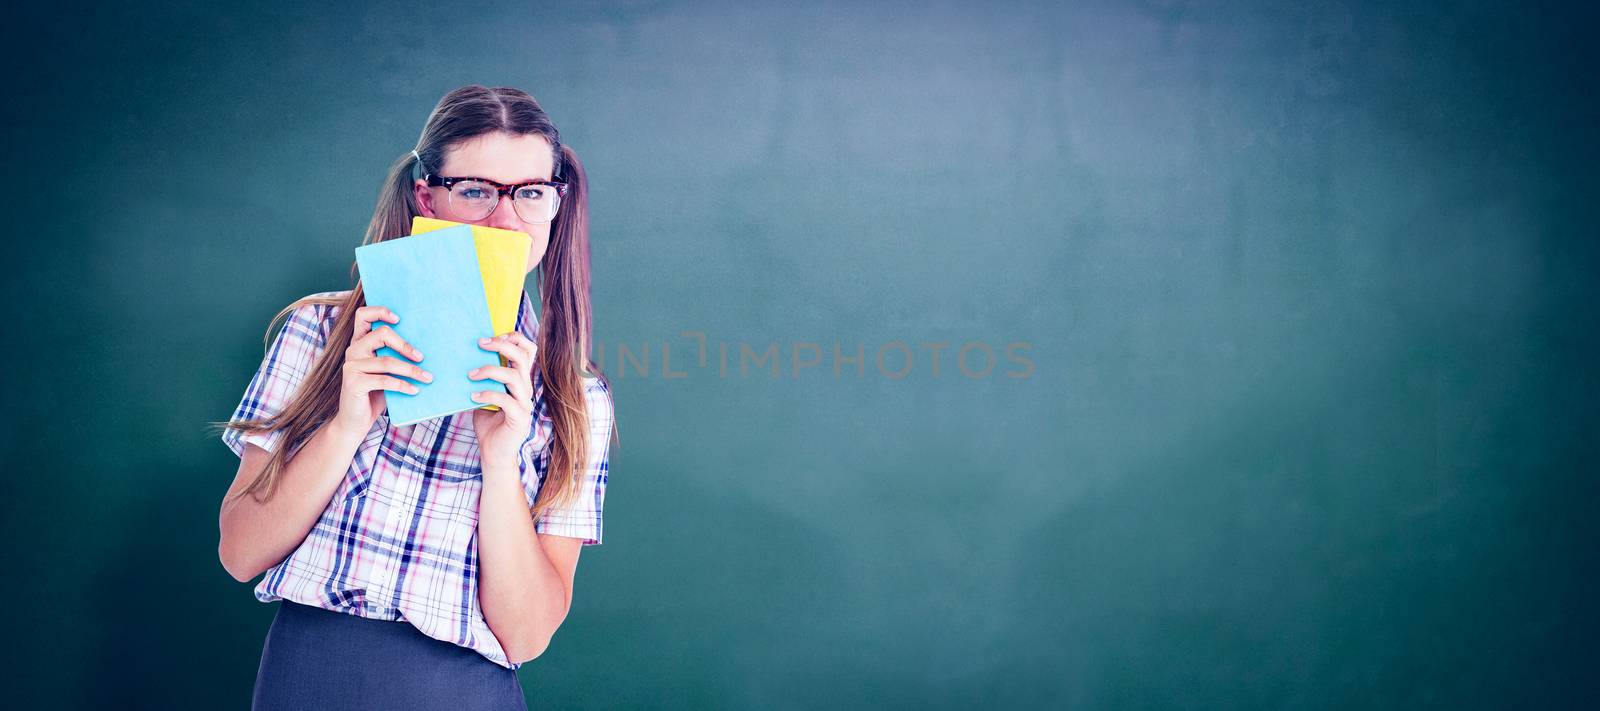 Geeky hipster hiding her face behind notepad  against green chalkboard